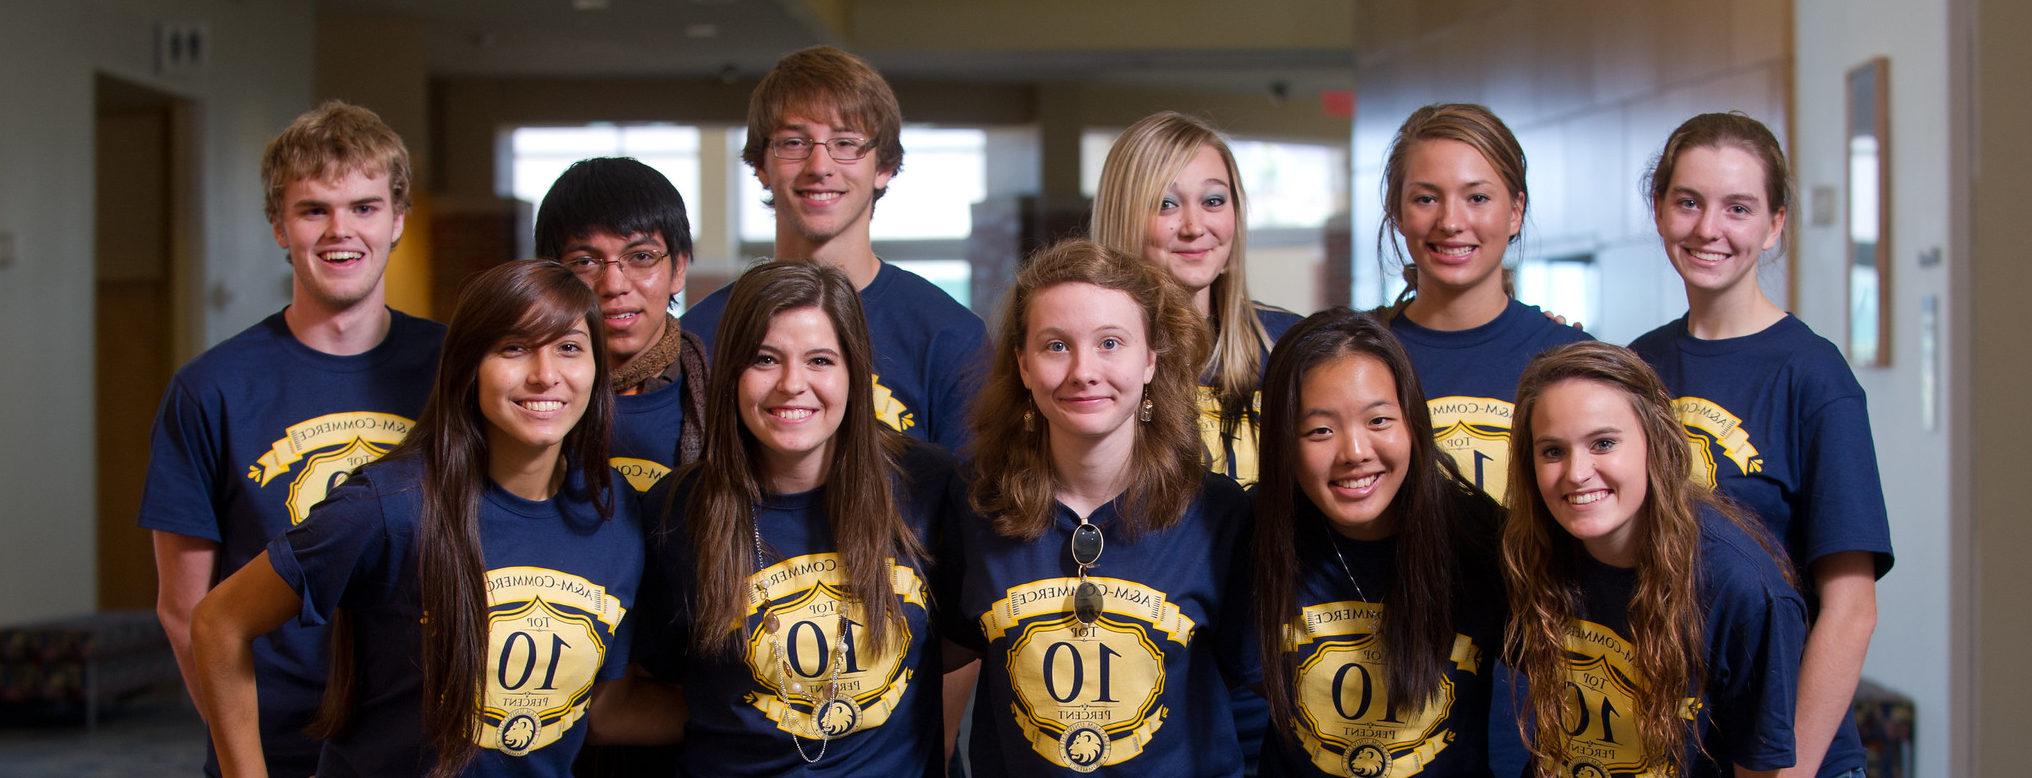 Group of High School students wearing shirts stating Top Ten Percent High School Students.